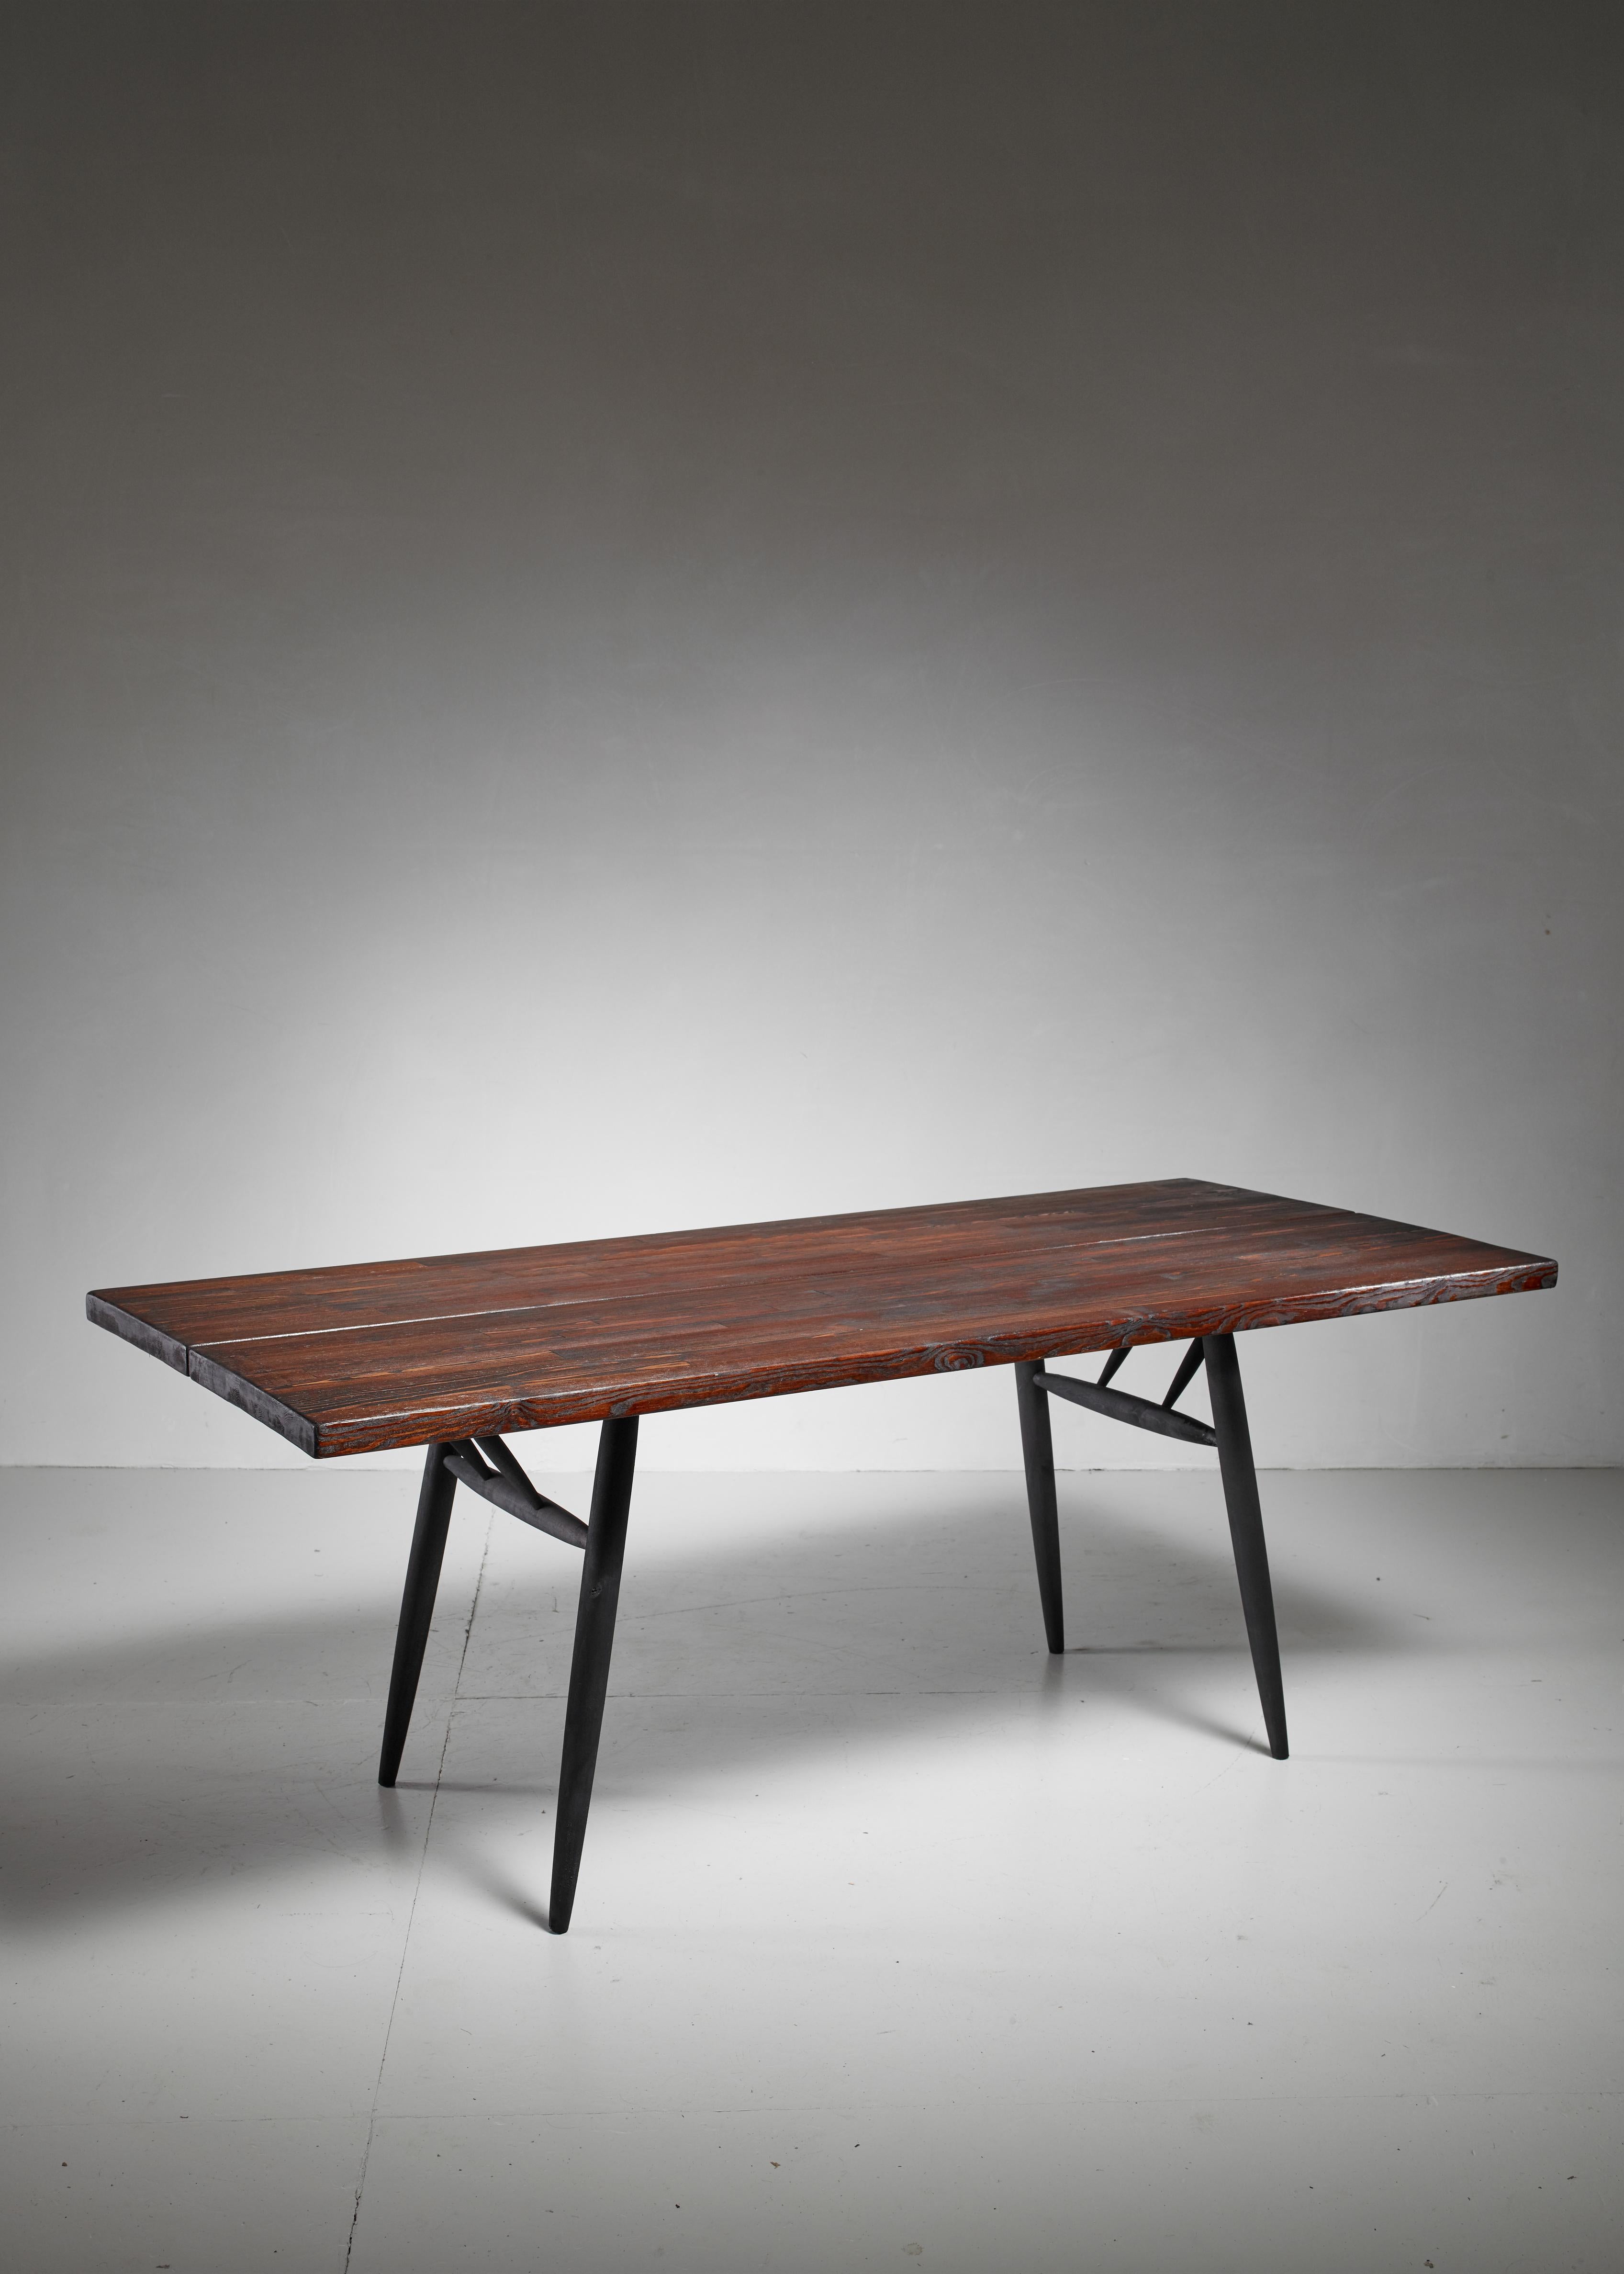 A stained pine dining table by Ilmari Tapiovaara for Laukaan Puu. Marked by Laukaan Puu and in a very good condition with a wonderful patina.